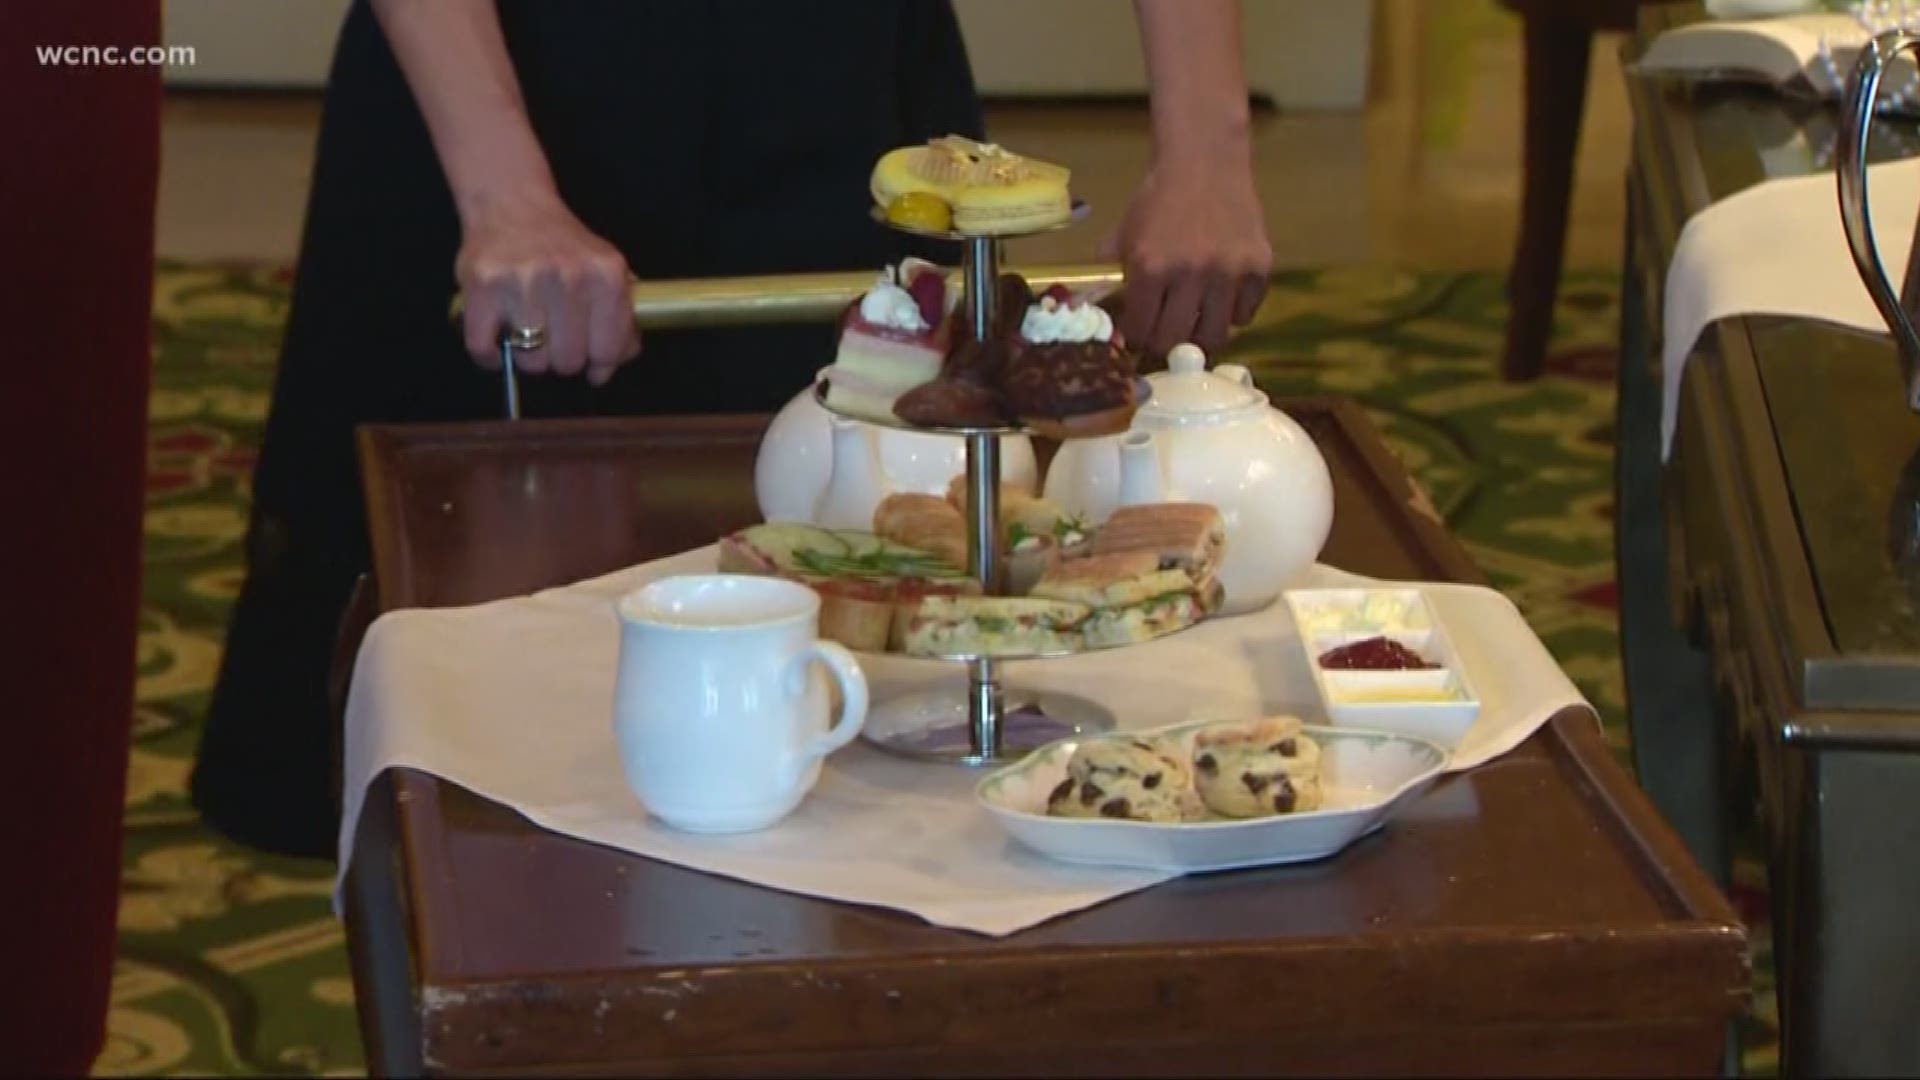 There is a specific way to have afternoon high tea, Rachel Rollar shows you how.